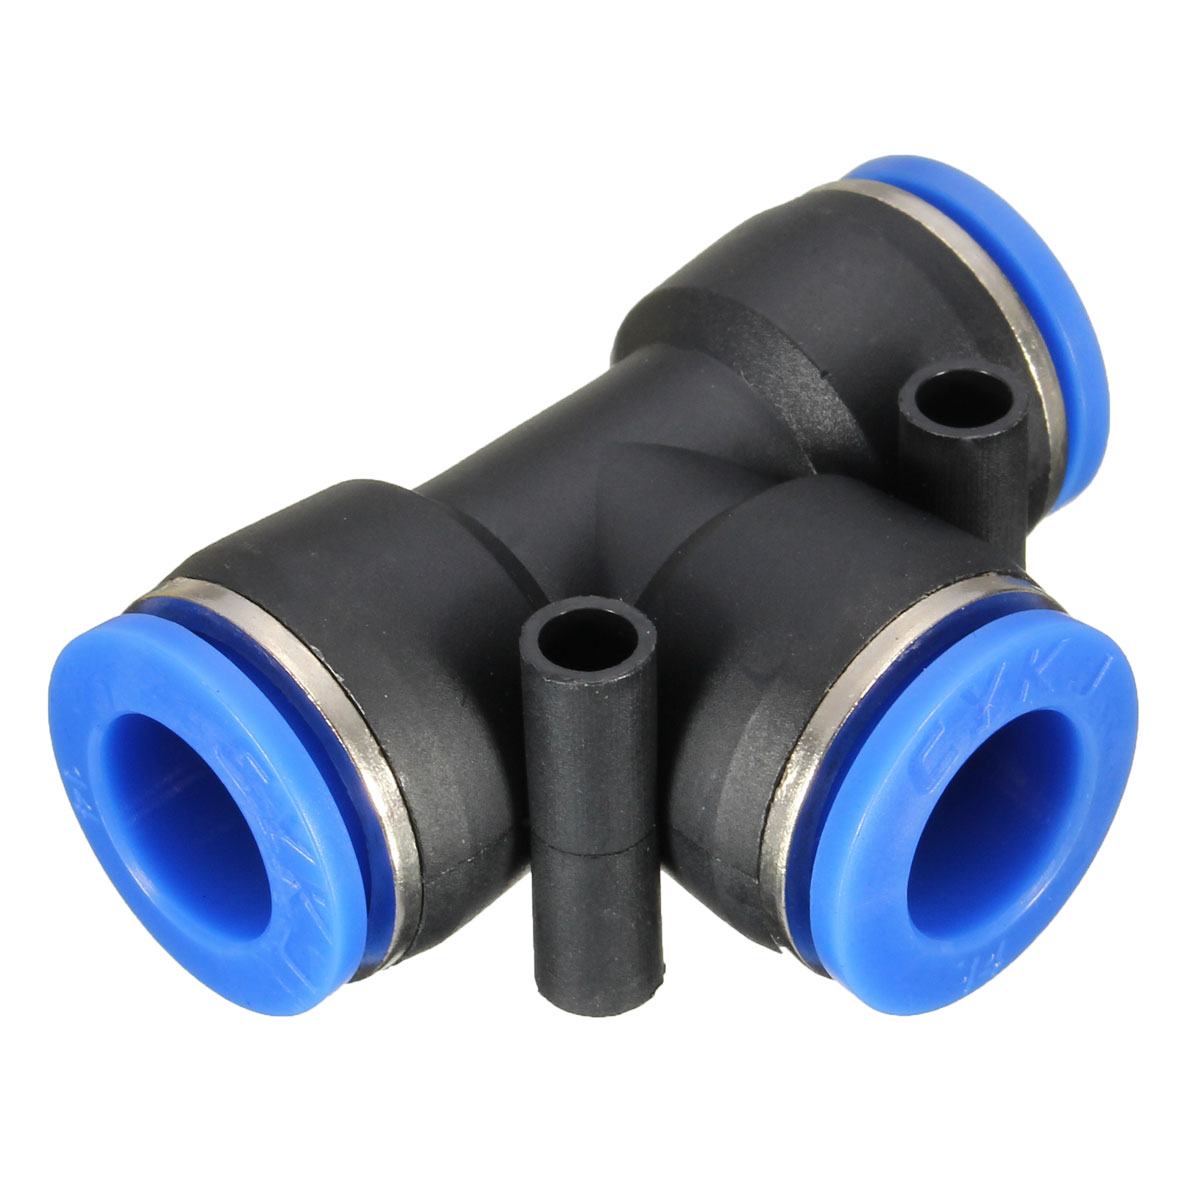 Pneumatic-Push-In-Fittings-For-Air-Water-Hose-Pipe-Connectors-Tube-Connector-1030560-7